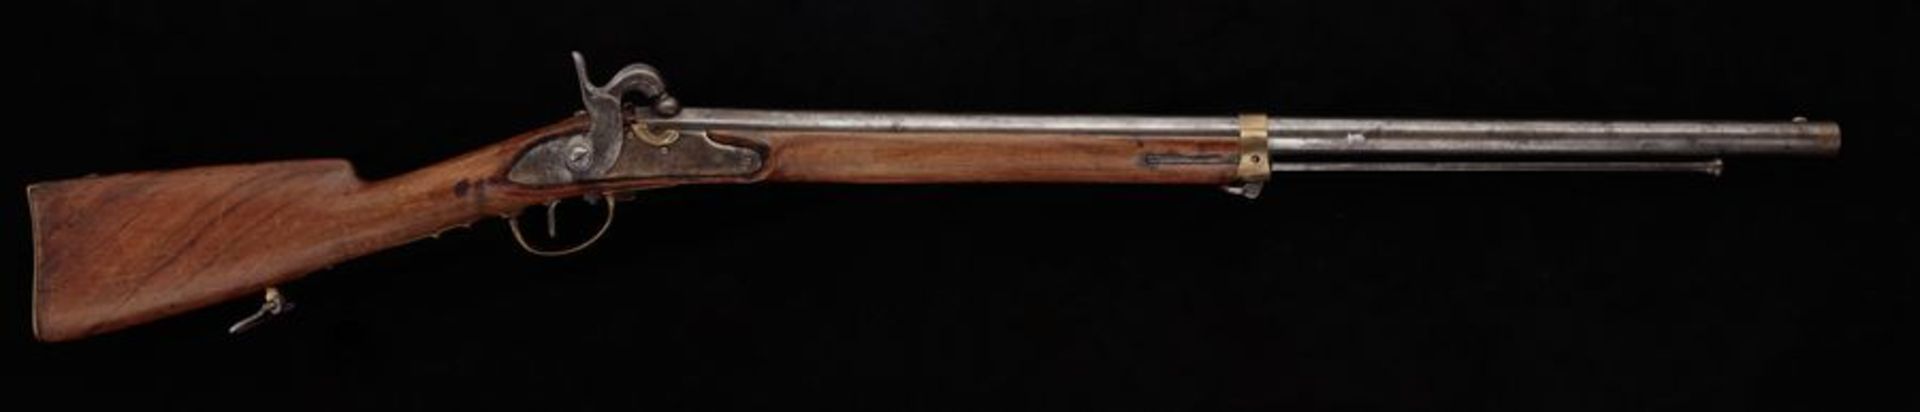 Cavalry Blunderbuss with capsule lock, remake of int French musket model AN [...] - Bild 4 aus 4